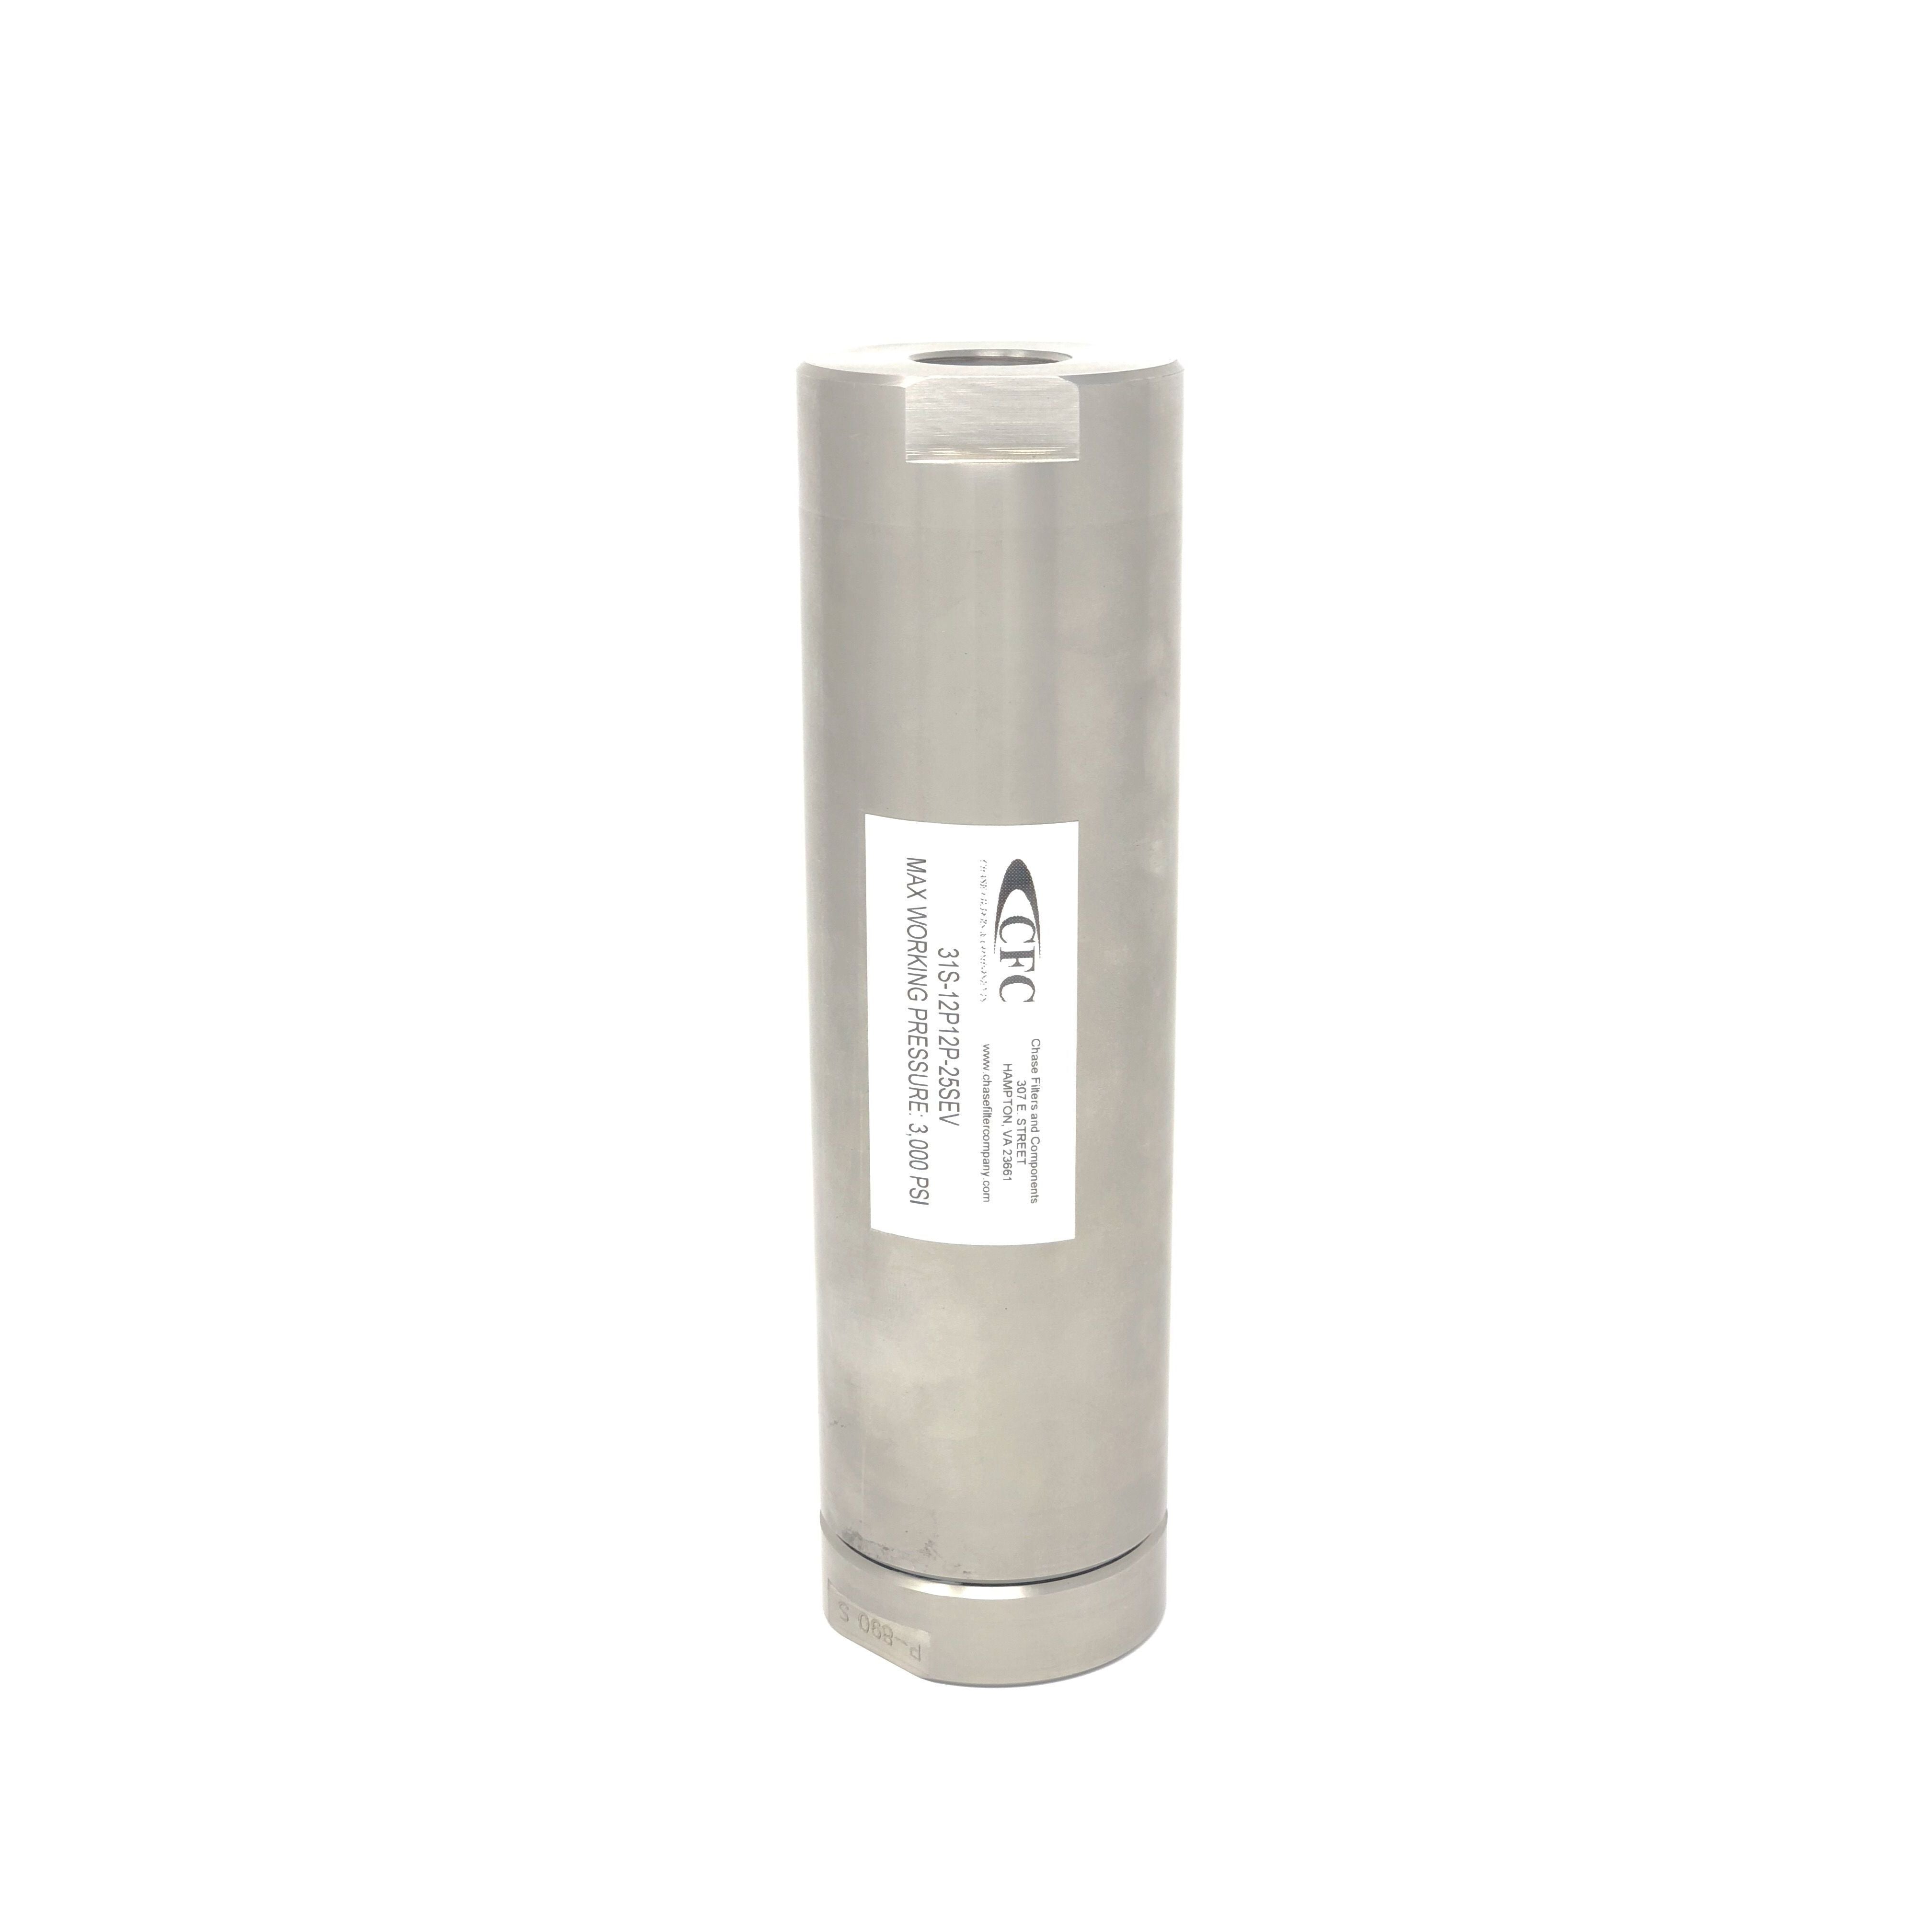 31S-12P12P-18SN : Chase High Pressure Inline Filter, 3000psi, 3/4" NPT, 18 Micron, No Visual Indicator, No Bypass